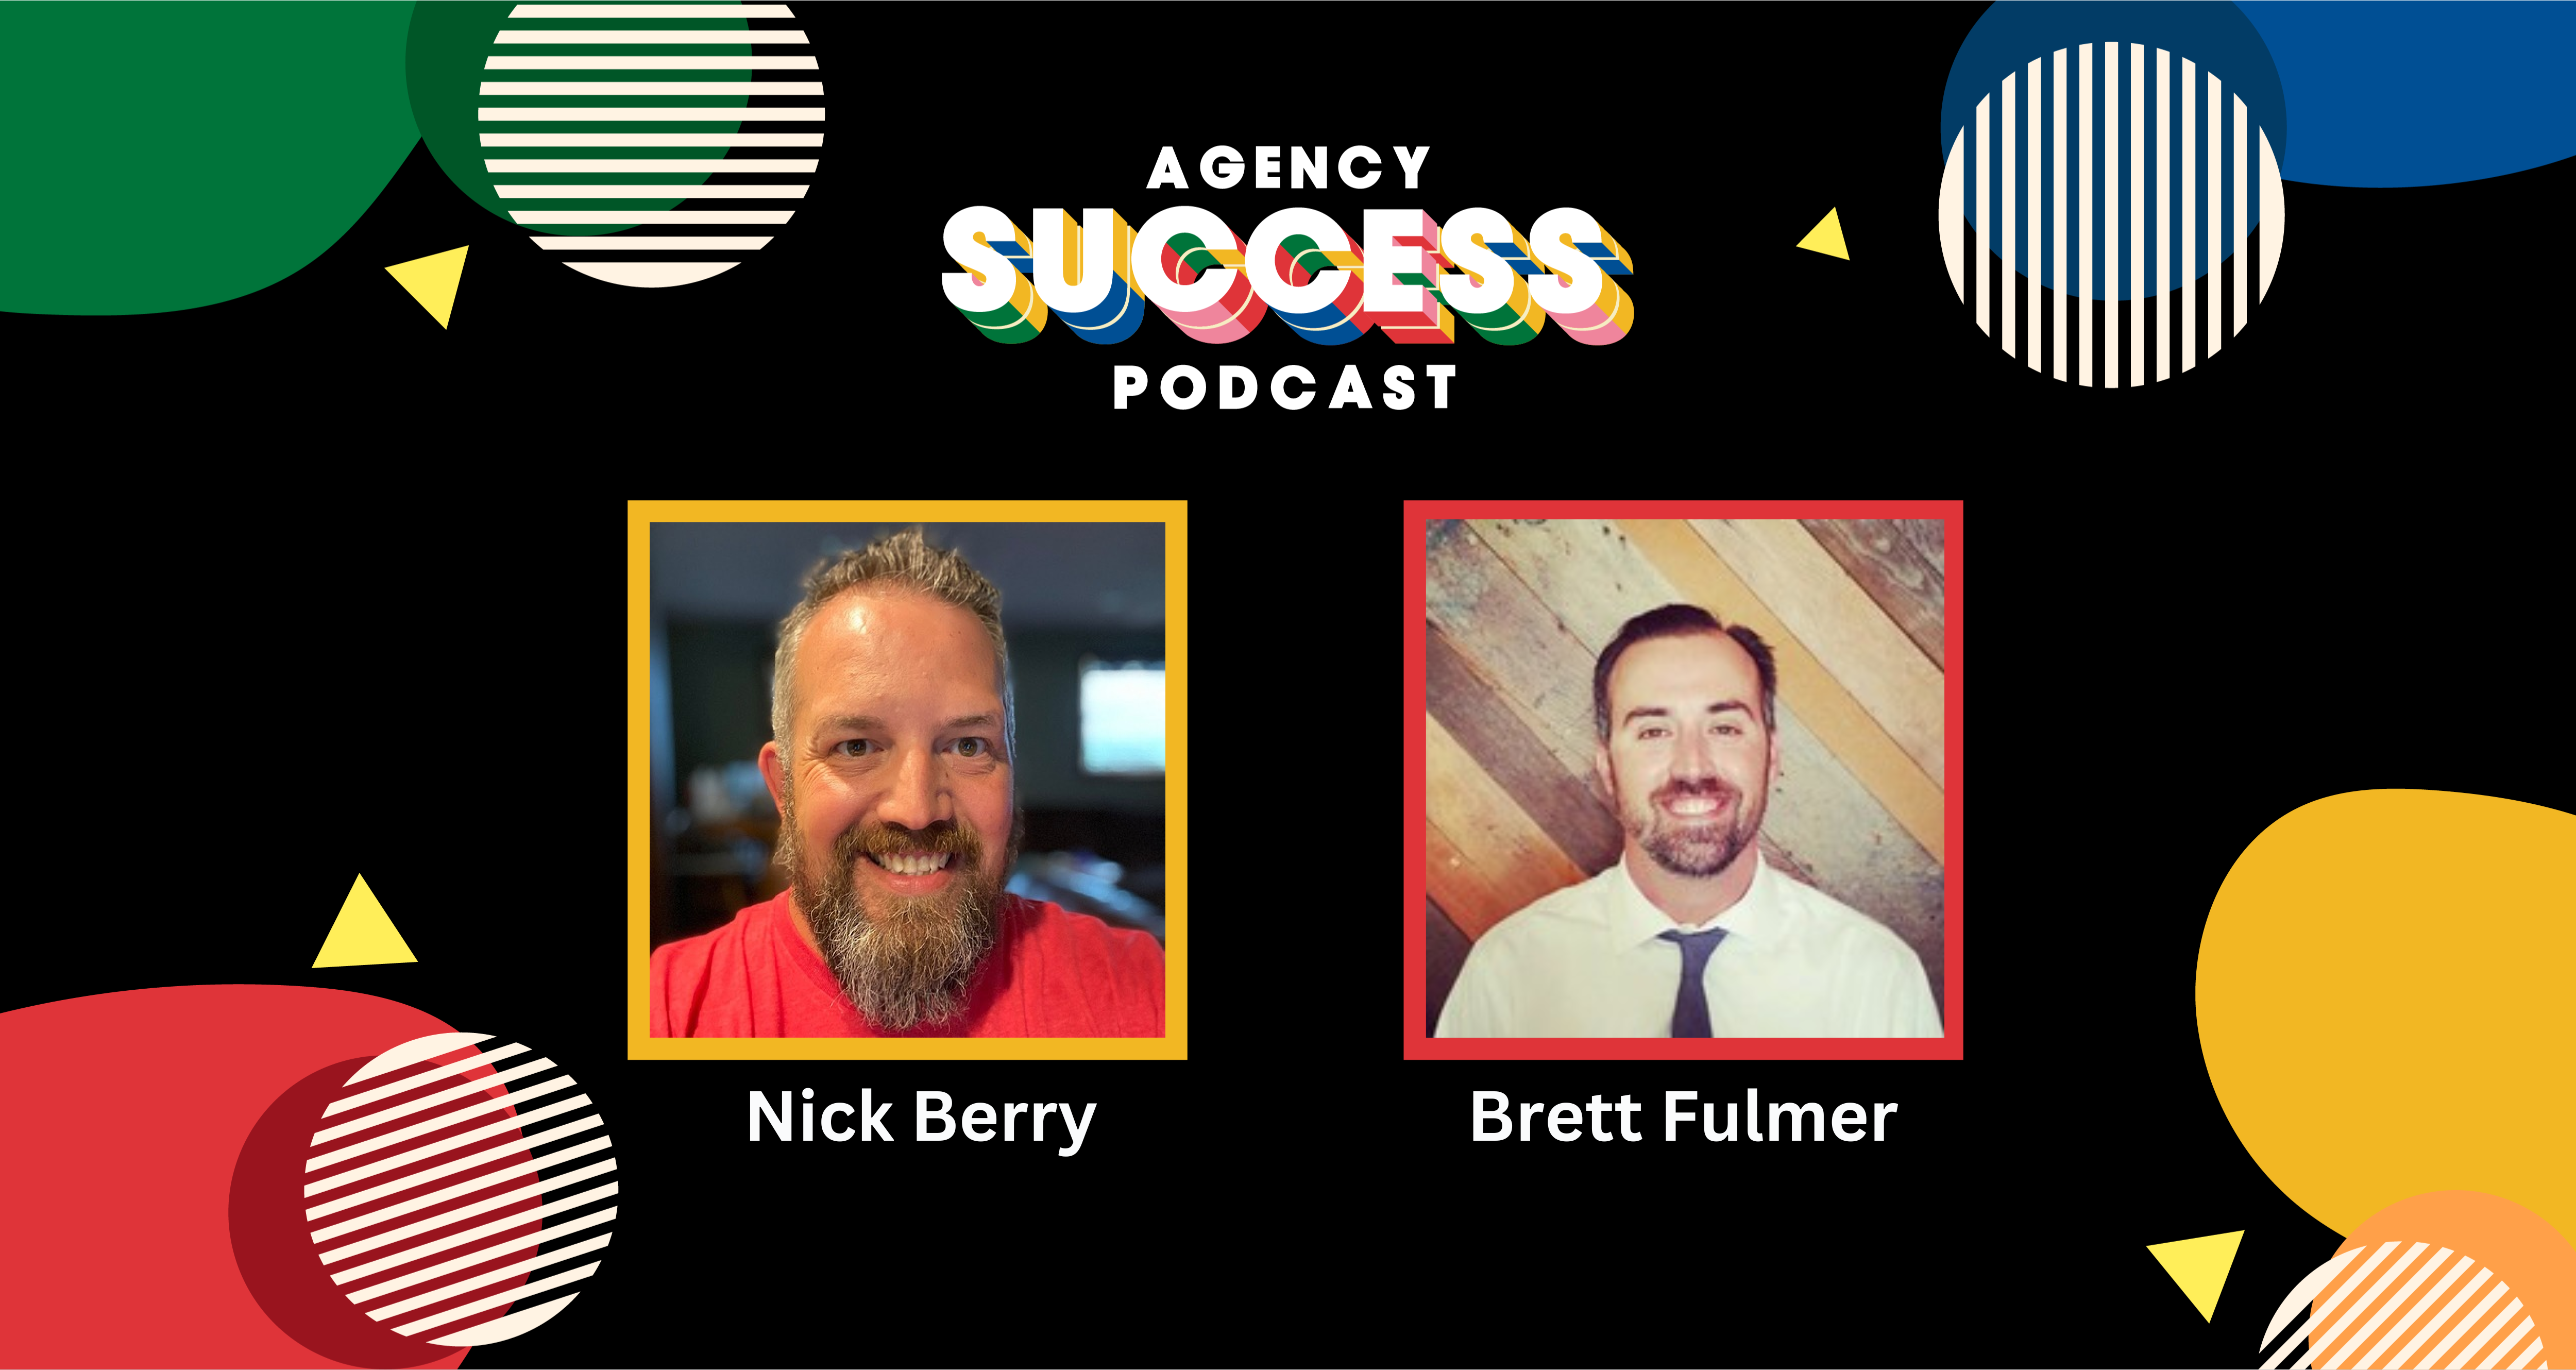 Agency Success Podcast Episode 2: Brewing Success in Insurance - Relationships, Digital Savvy, and Community Connections with Brett Fulmer